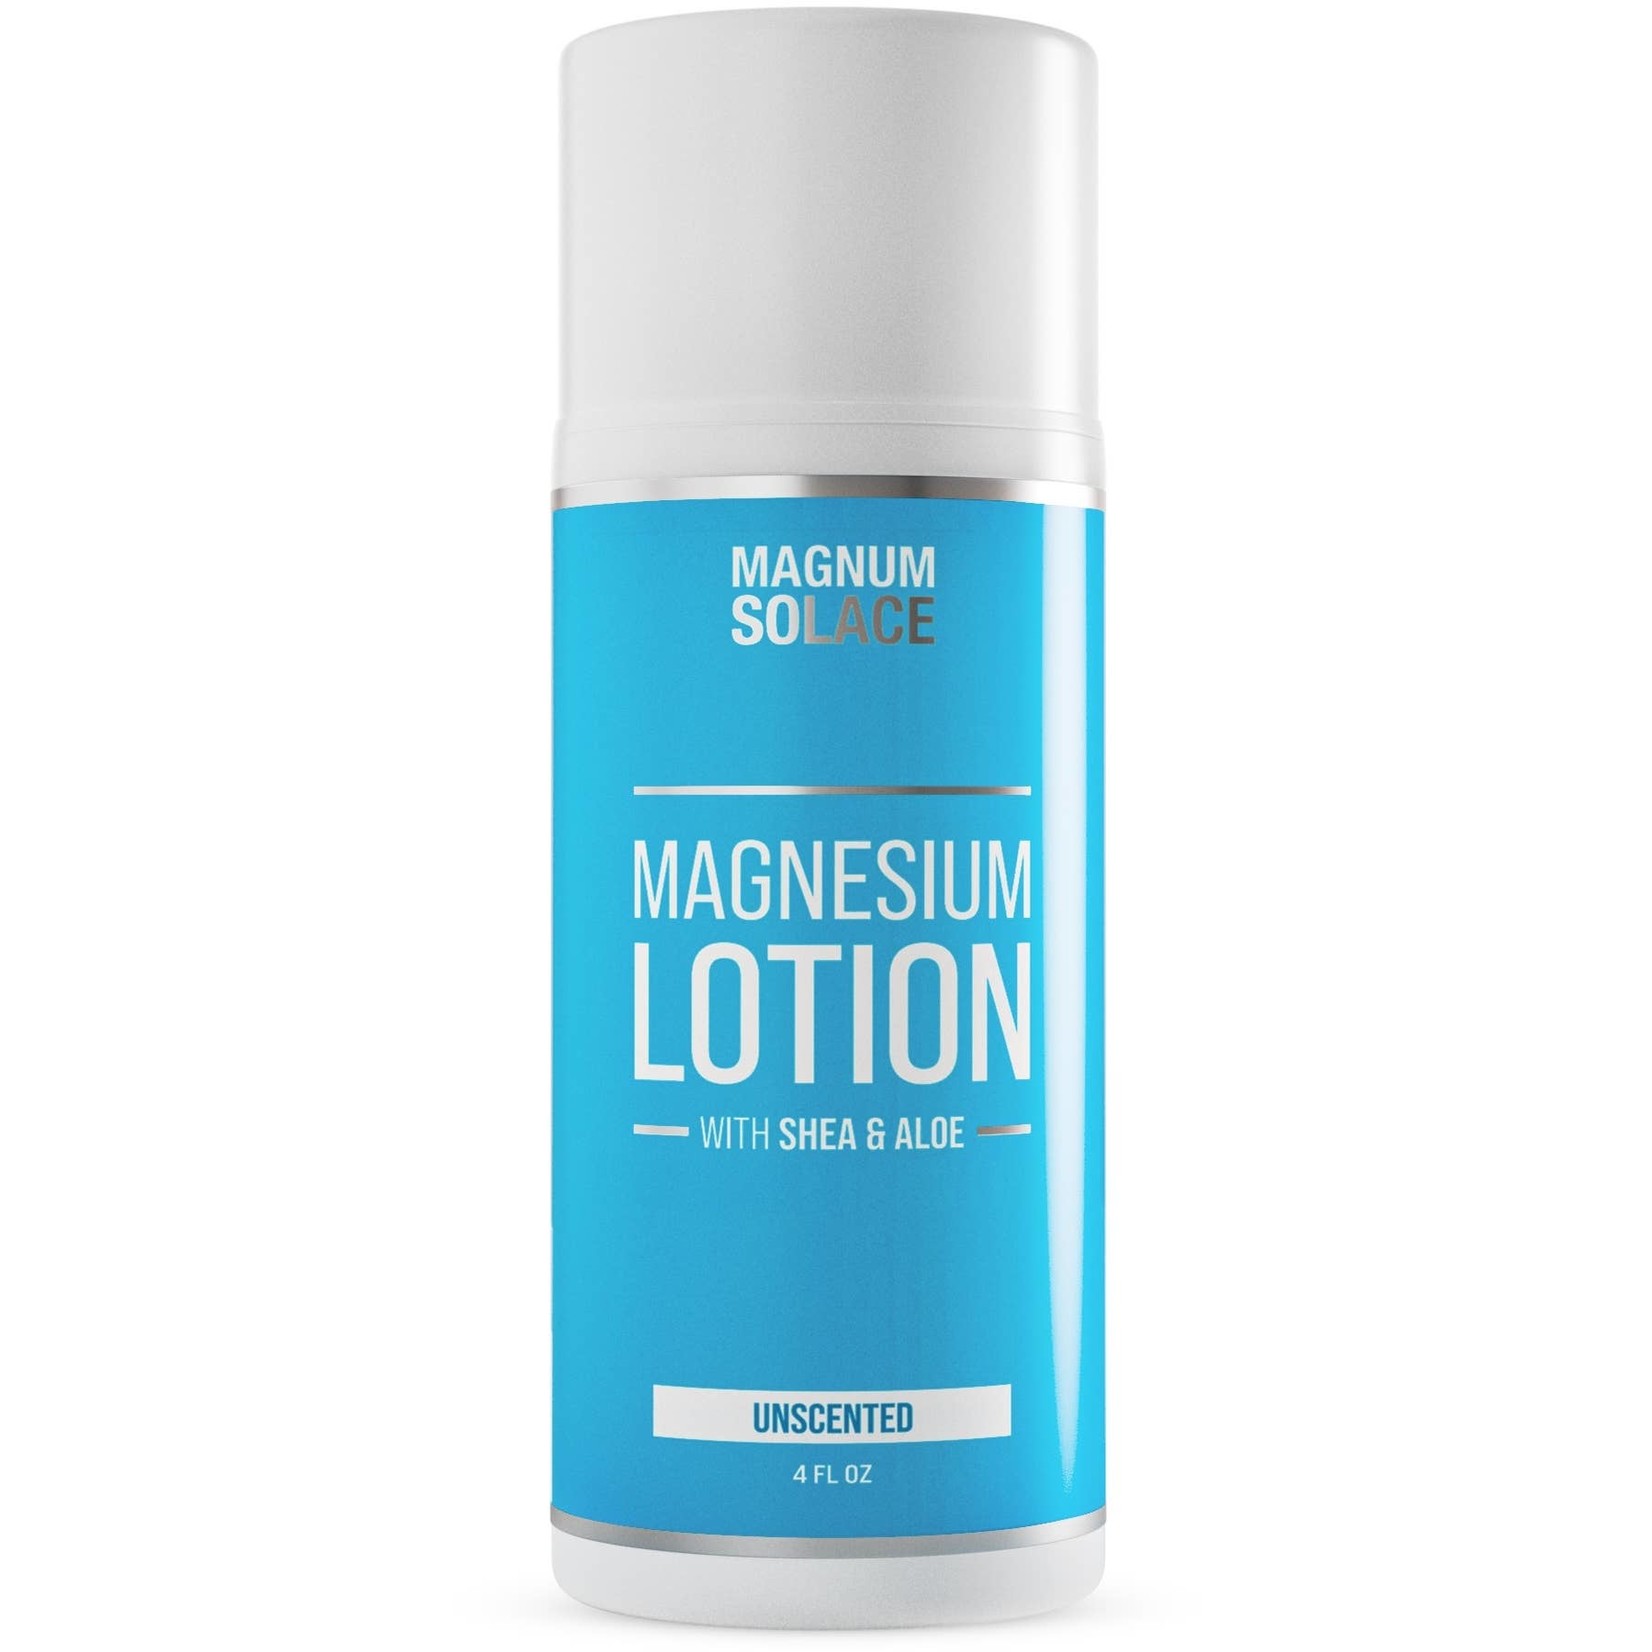 Magnum Solace Magnesium Lotion for Restless Legs & Muscle Pain Relief